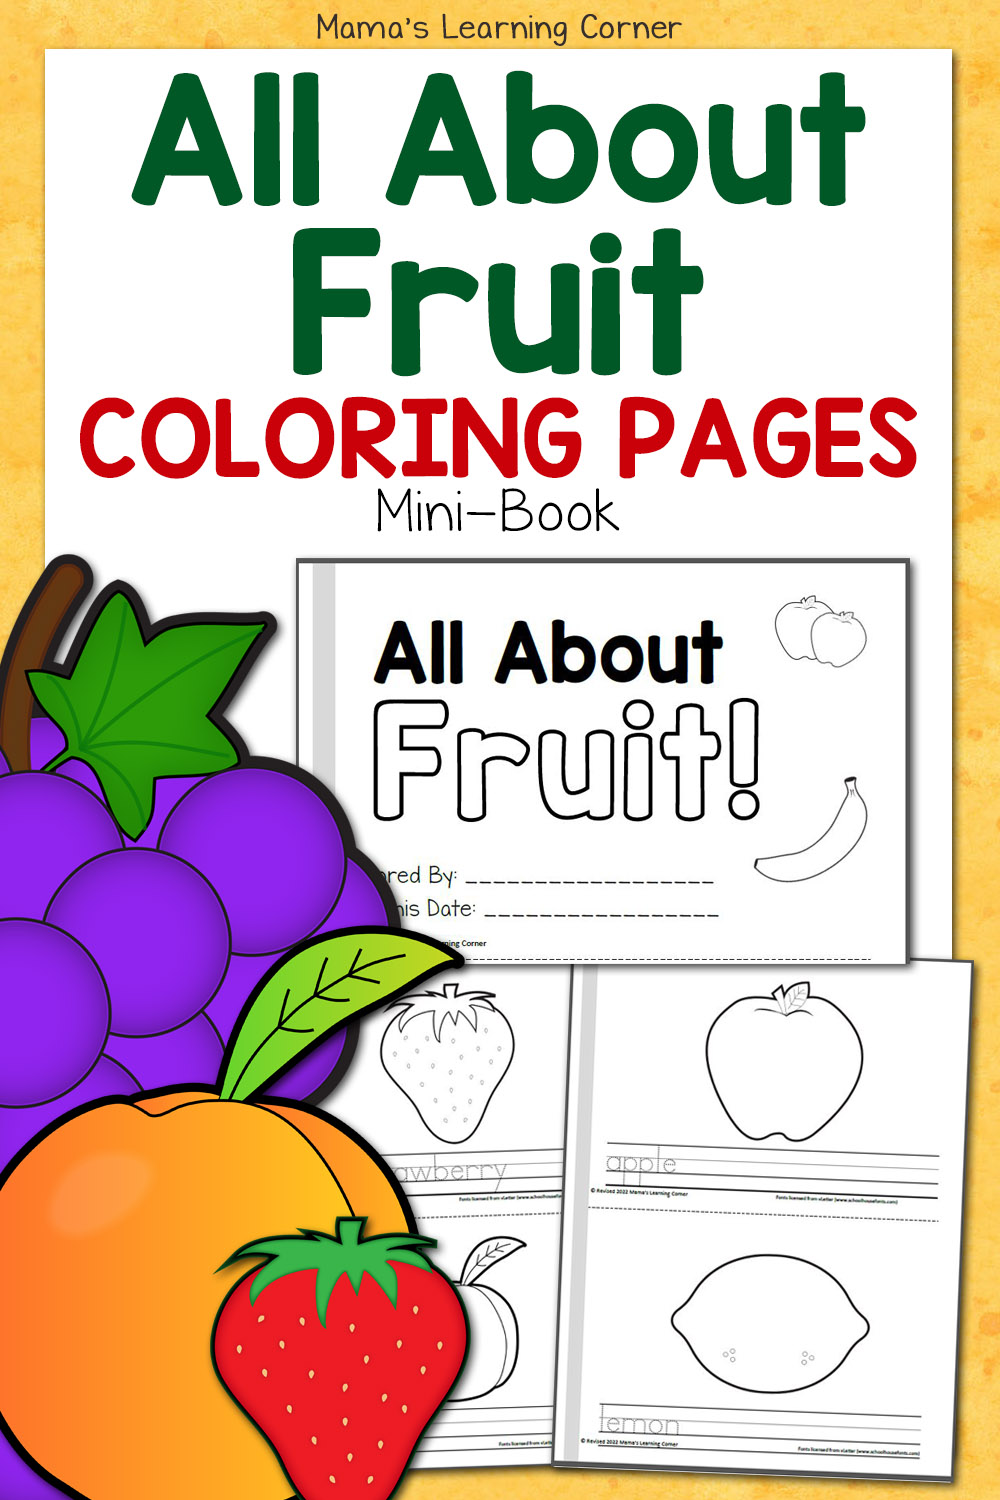 II. Benefits of Using Coloring Books for Learning About Fruits